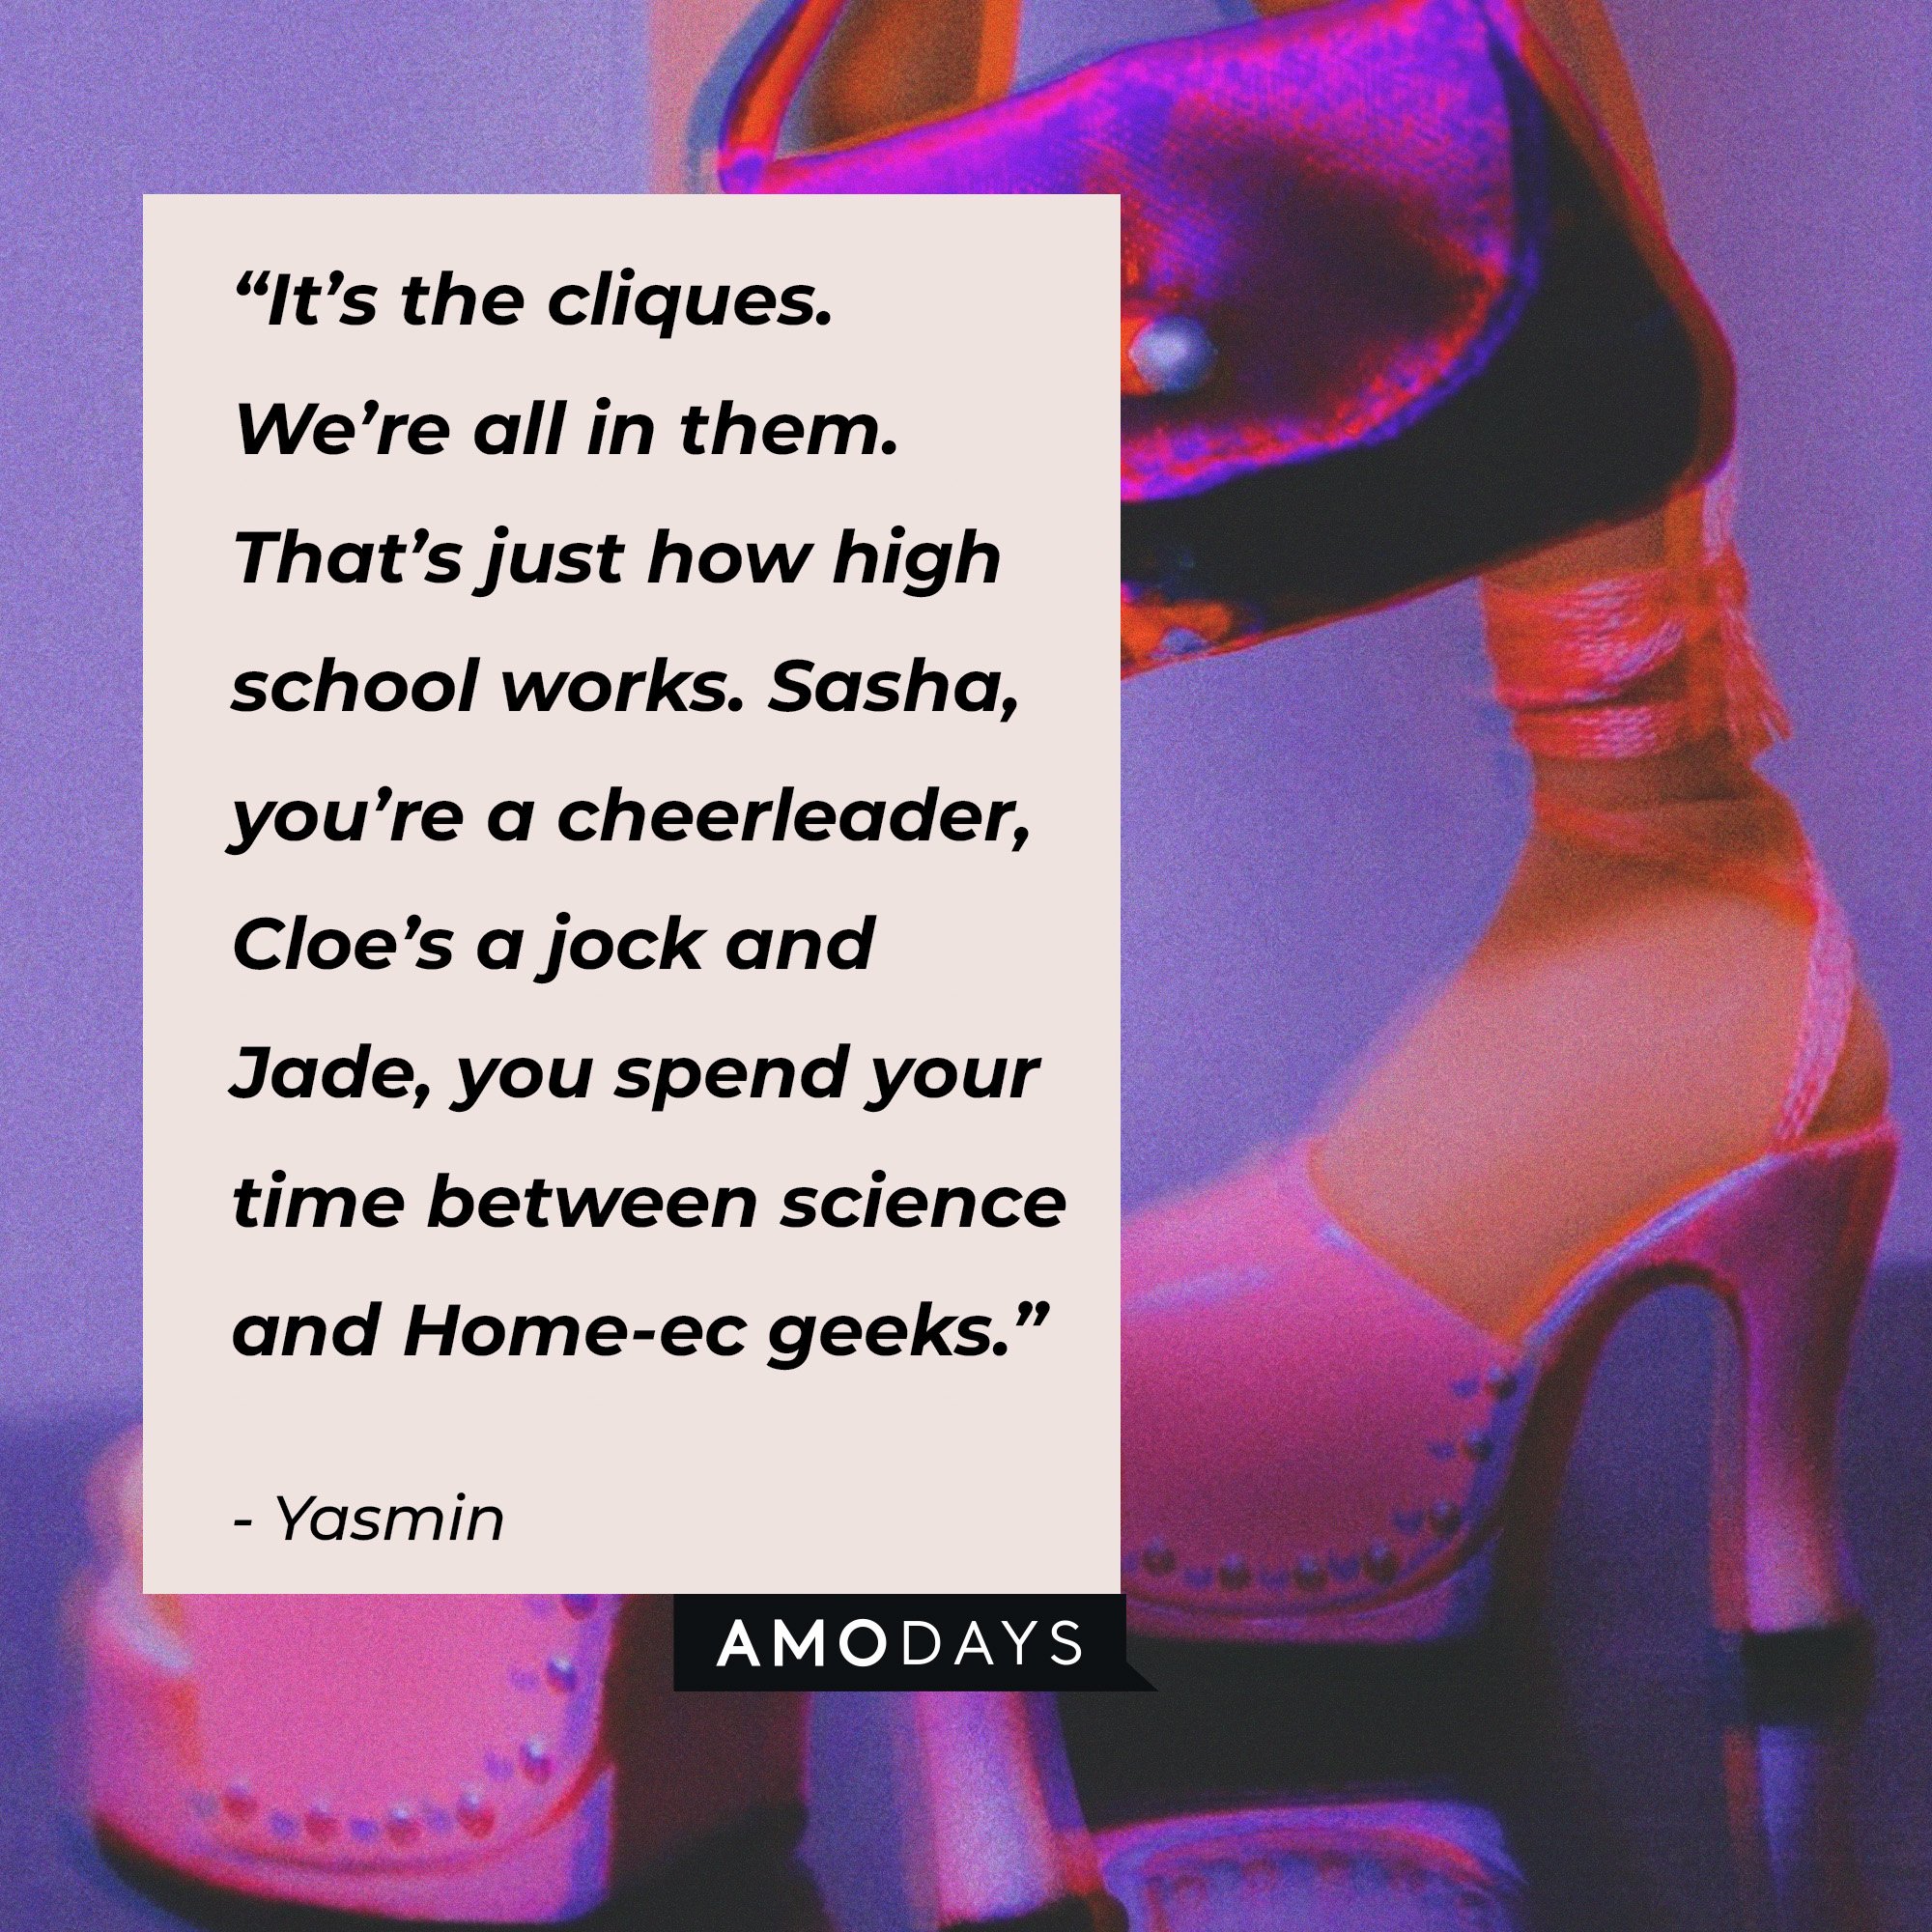 Yasmin's quote: “It’s the cliques. We’re all in them. That’s just how high school works. Sasha, you’re a cheerleader, Cloe’s a jock and Jade, you spend your time between science and Home-ec geeks.” | Image: AmoDays